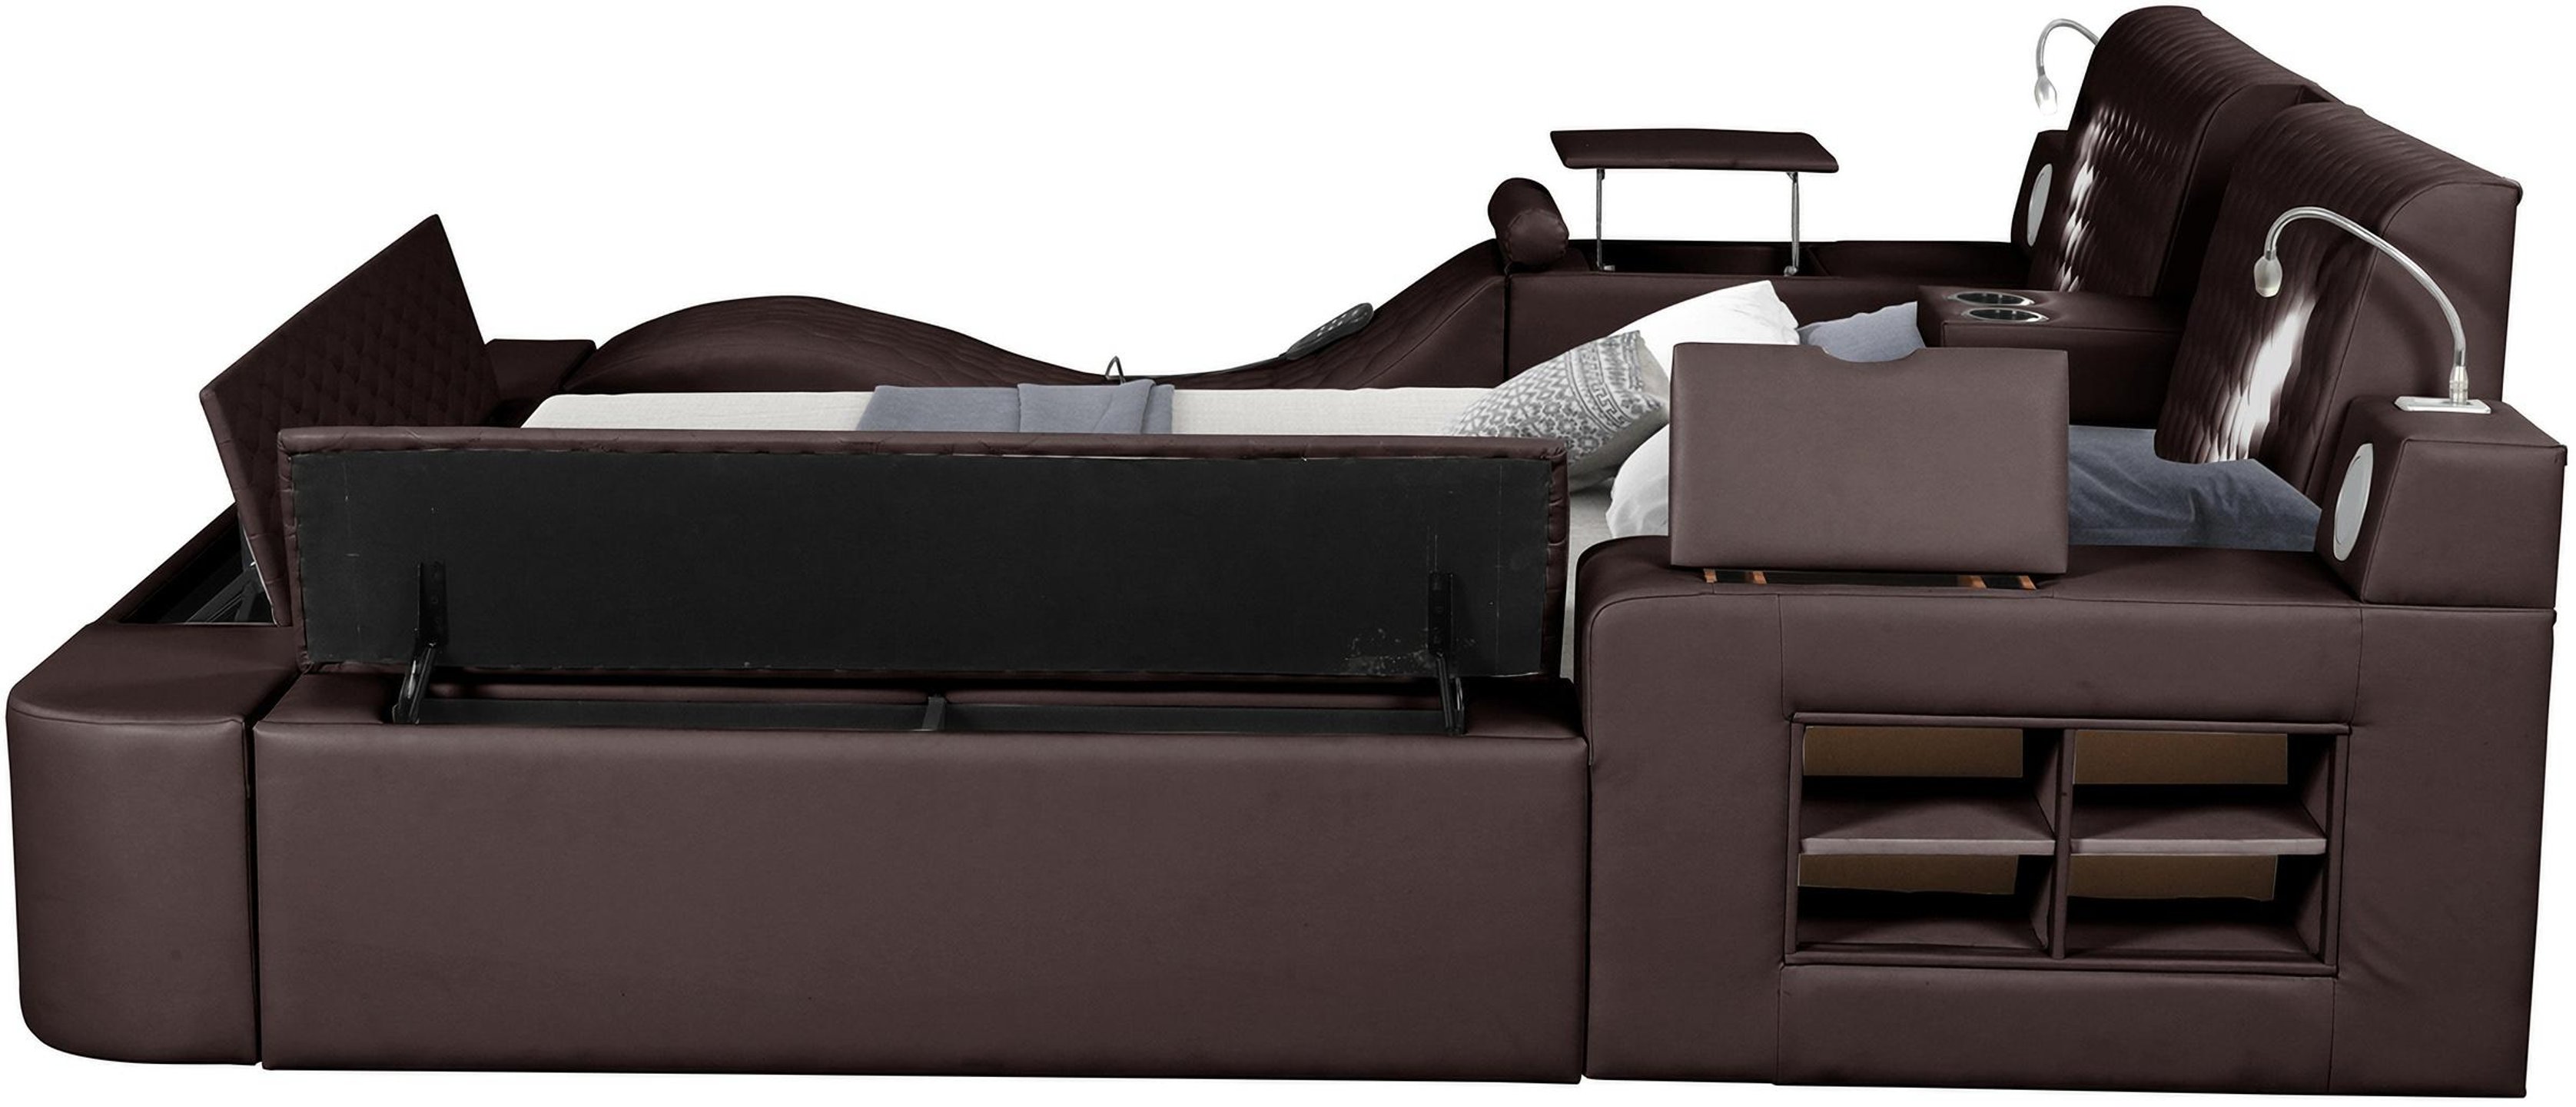 Buy Galaxy Home Furniture Zoya Br King Storage Bed In Brown Eco Leather Online 